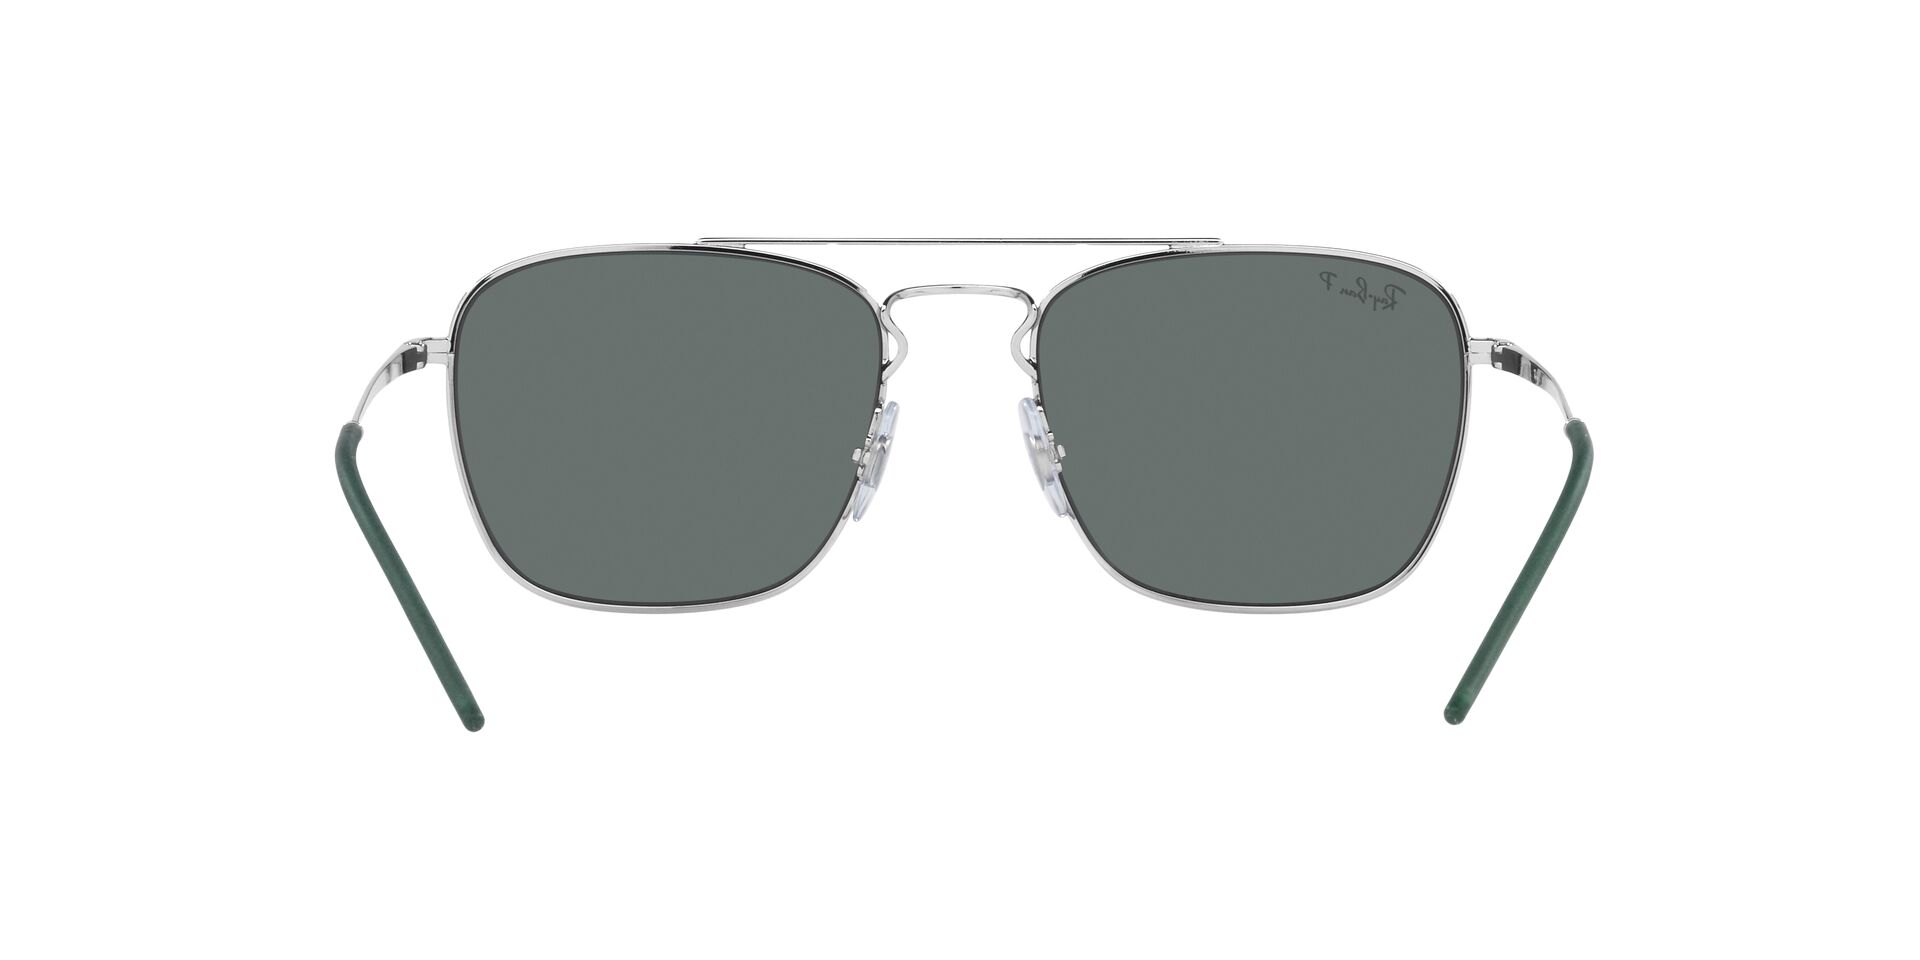 Buy Ray-Ban Casual Classic Sunglasses Online.